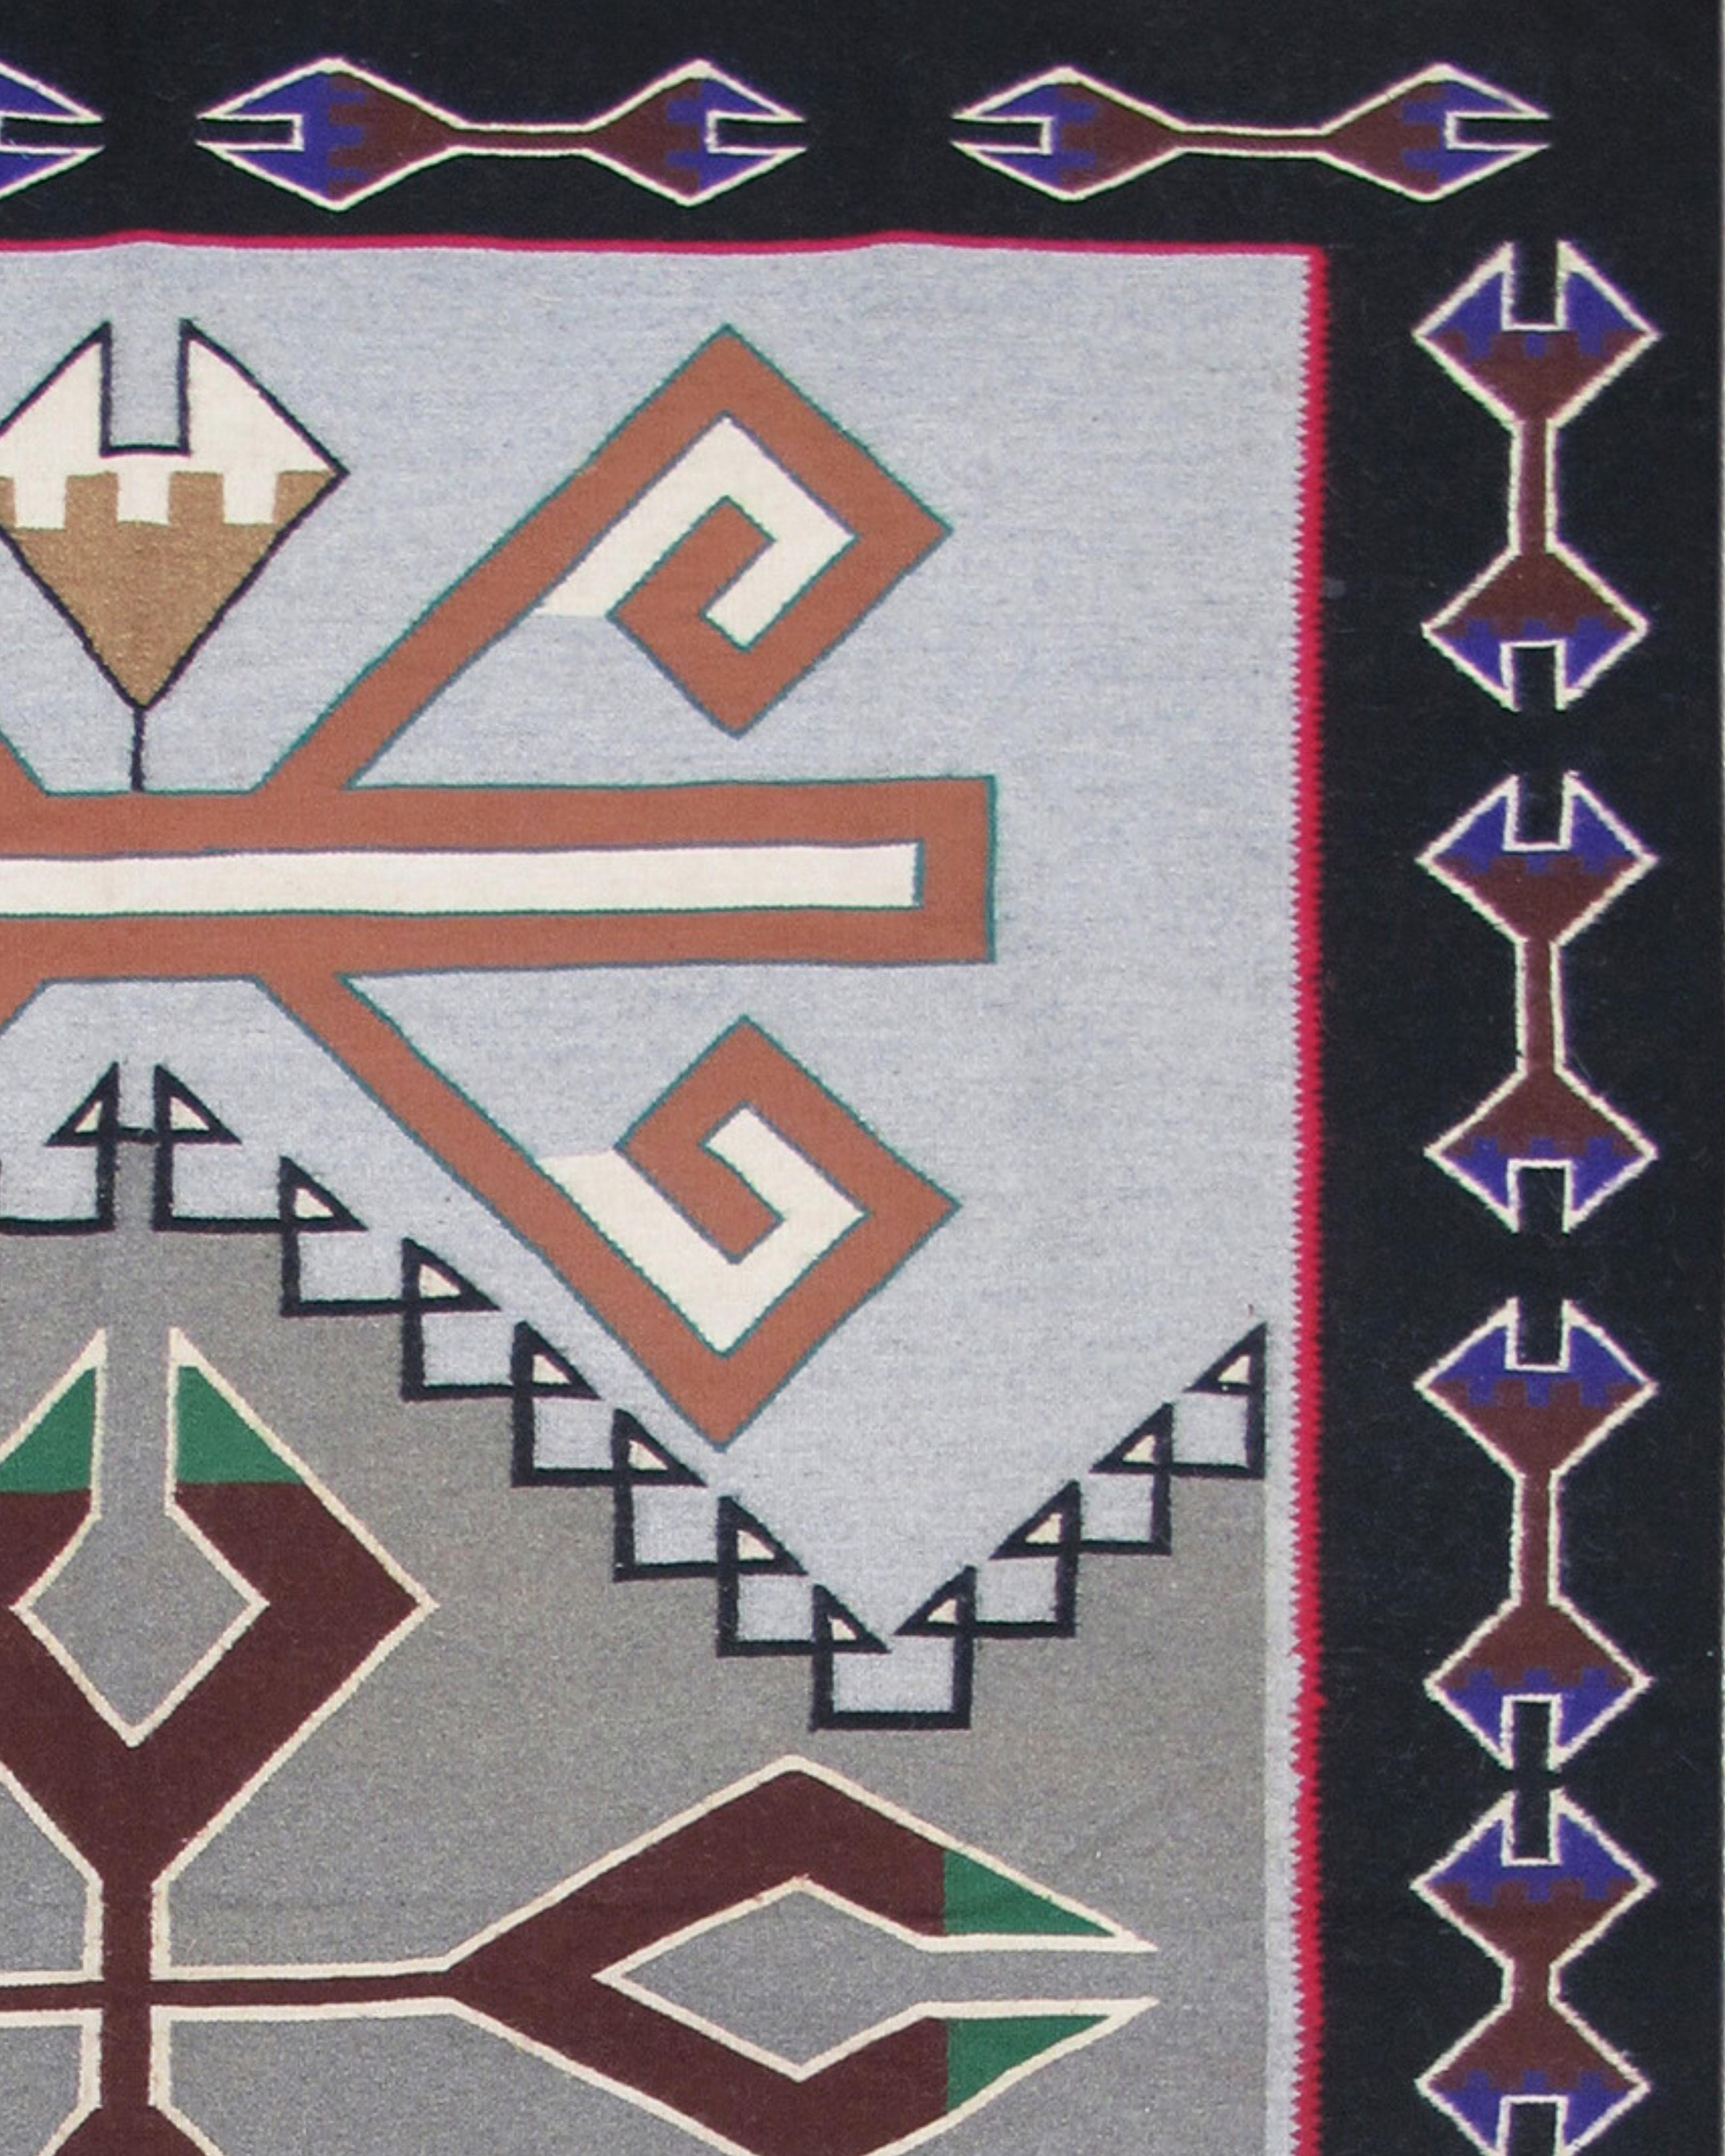 Teec Nos Pos Navajo Rug by Ruth Yabeny, 20th Century

By most accounts, the Navajo are the most prolific Native American weavers. While the indigenous peoples of the Southwest had been weaving with various vegetable fibers for generations, it was